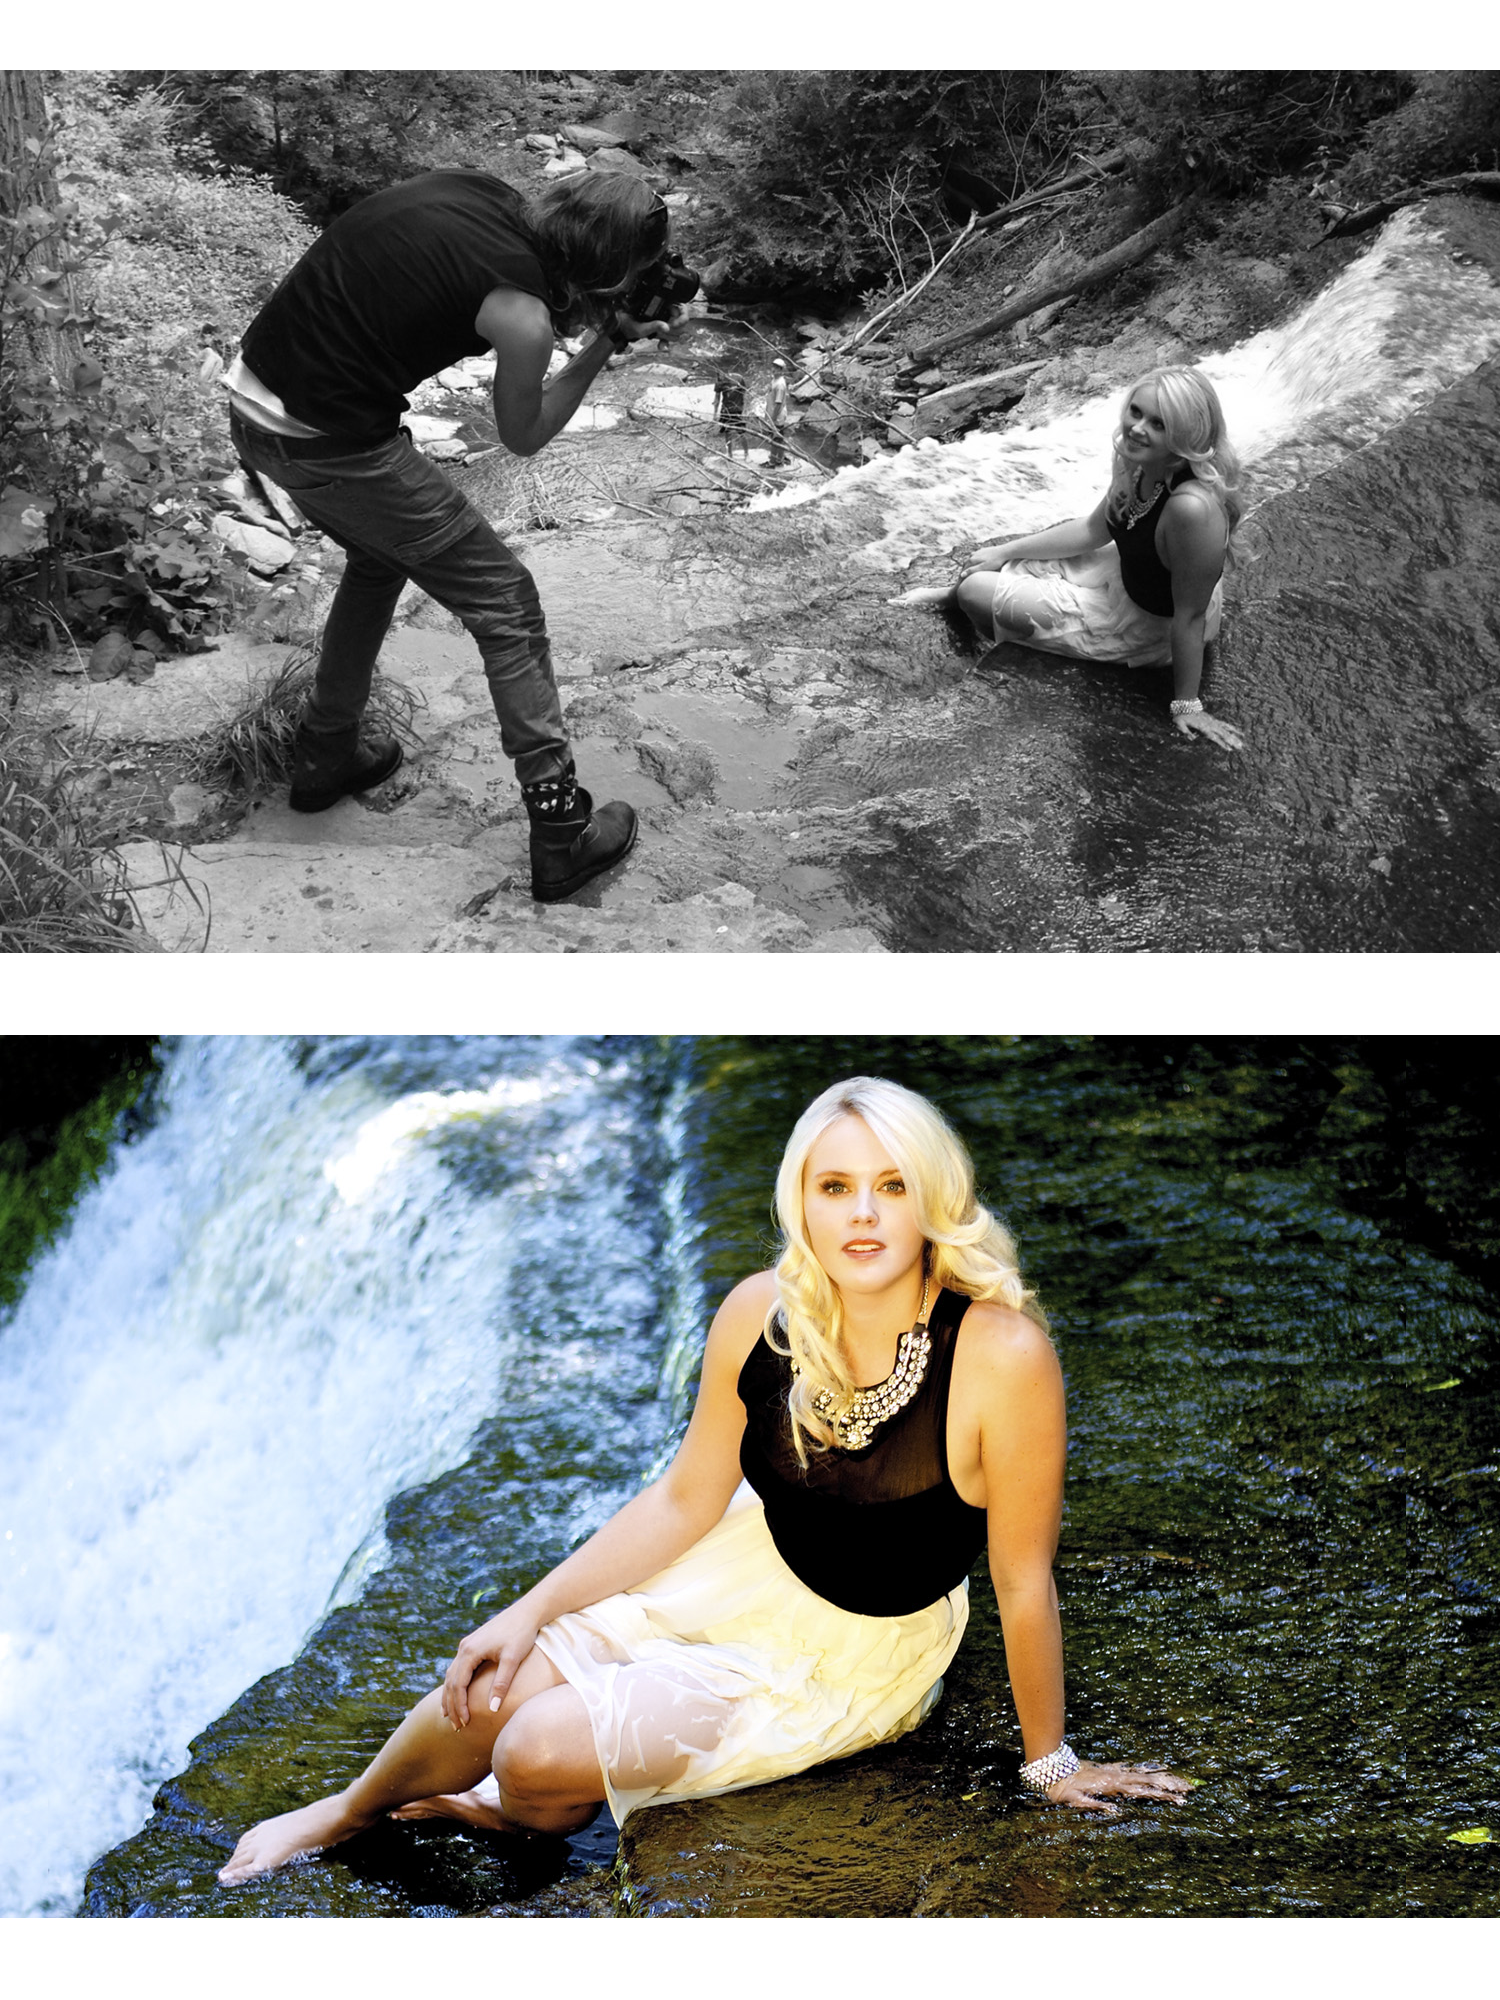 Fine Art Portrait Photograph in color Krista Earle sitting by waterfall in color with black and white bts photo of Mark Maryanovich photographing her placed above